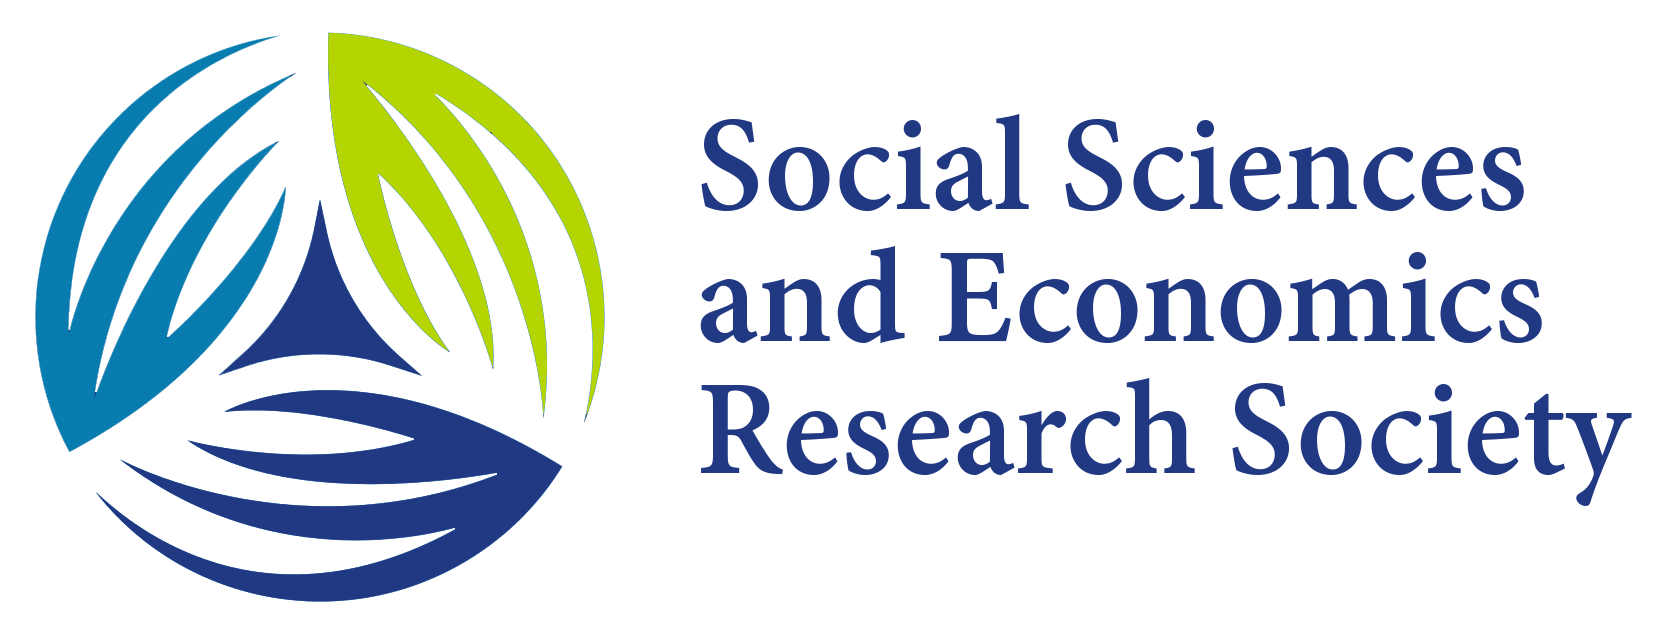 Amsterdam, Netherlands SSERS 2nd International Conference on  Multidisciplinary Research in Education, Business Economics, Management & Social Sciences